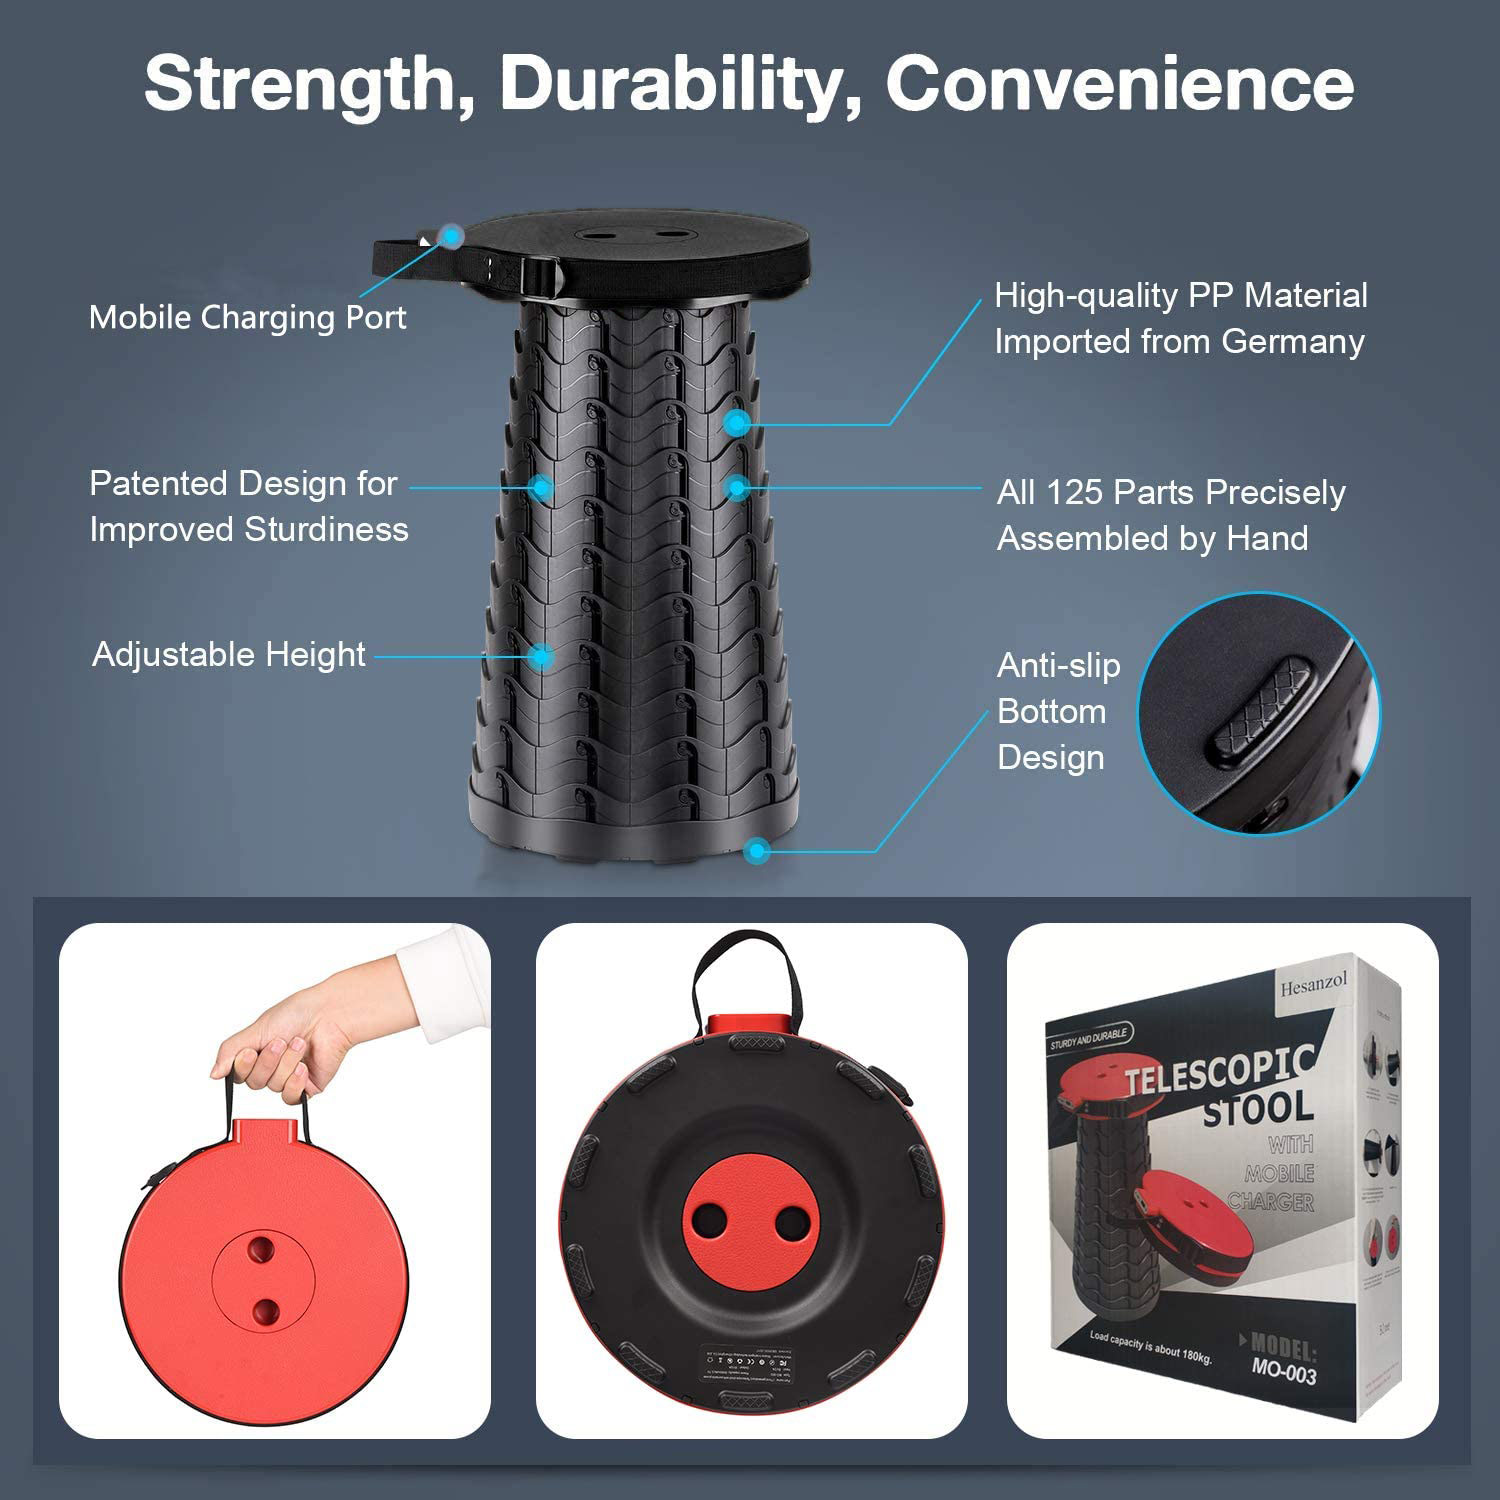 3rd Gen Portable Telescopic Stool with Mobile Charger Indoor Outdoor Camping Retractable Built-in Phone for iPhone Android 400Load Capacity Lightweight Adjustable Stool Free iPhone charger& carabiner 